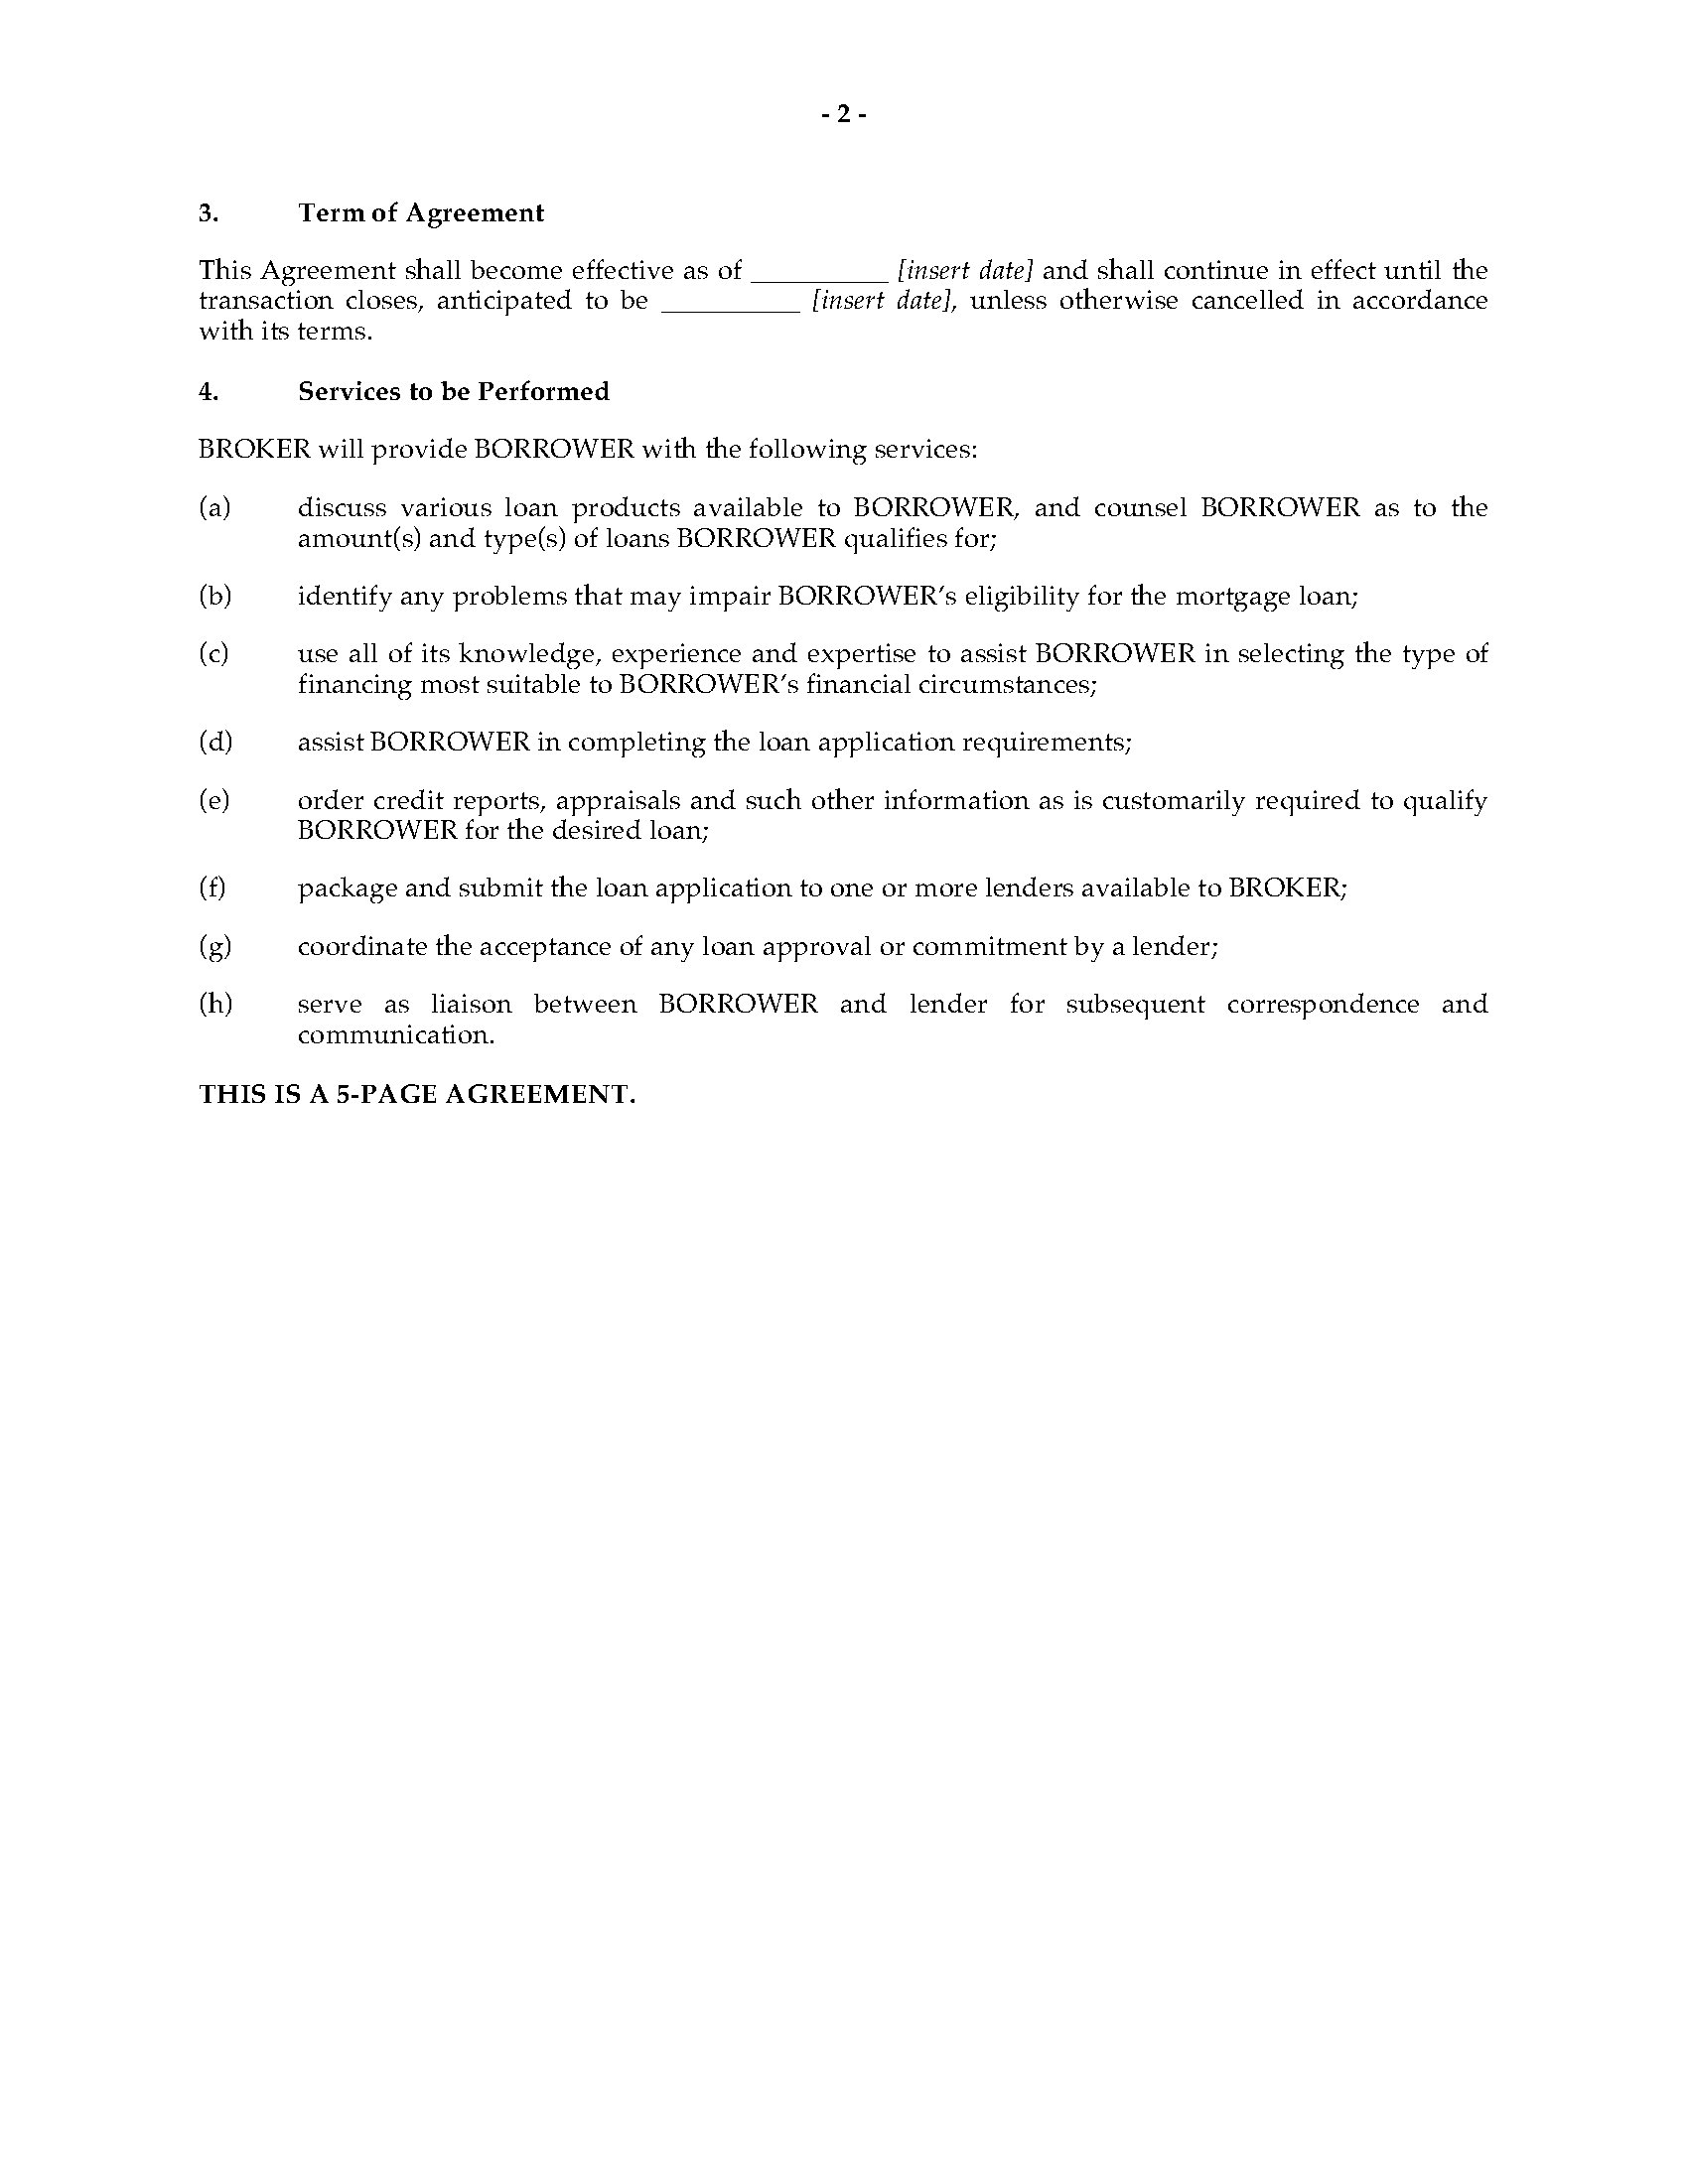 Florida Mortgage Brokerage Fee Agreement  Legal Forms and With commercial mortgage broker fee agreement template